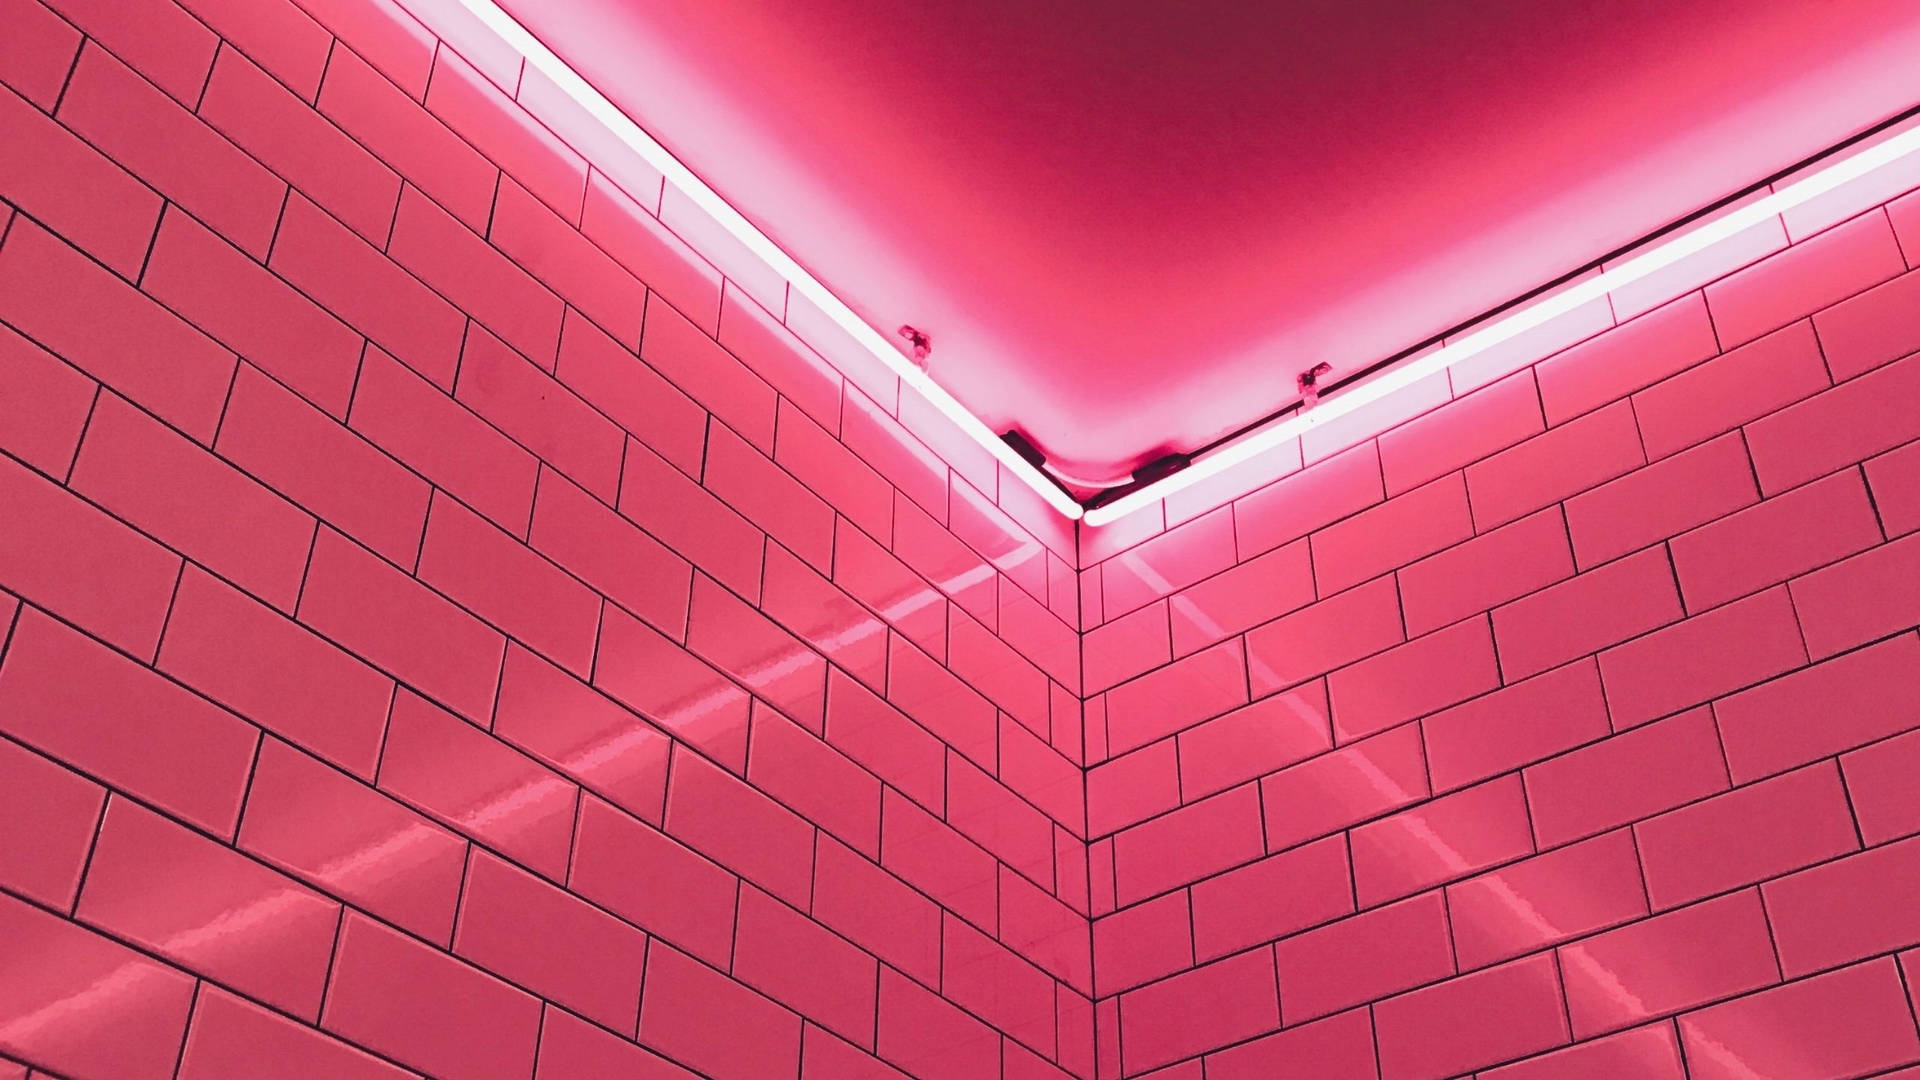 Neon Pink Aesthetic Brick Wall Background